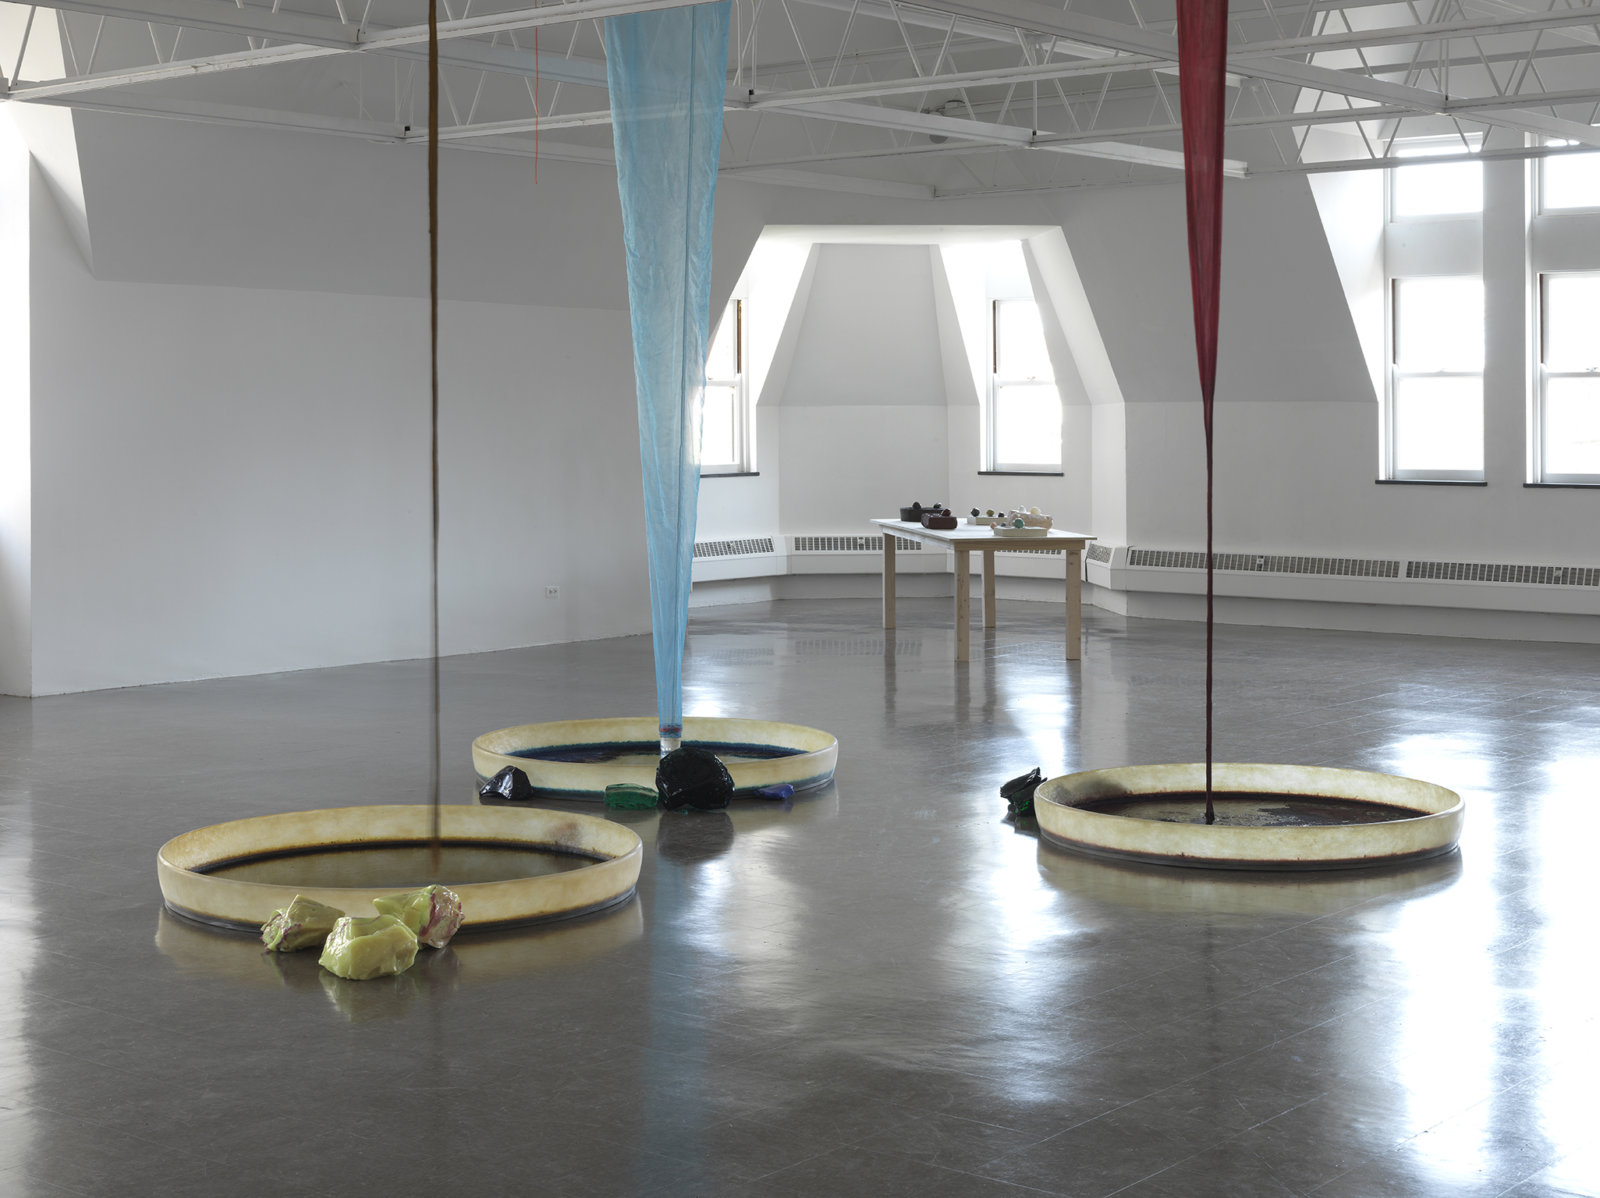 Christina Mackie, Colour Drop (detail), 2014; 3 silk, linen and polyester nets with aluminum rings and acrylic hangers; pulley system comprised of polyester, manila, and sisal rope; 3 uncoated fibreglass trays, 1 gel coated fibreglass tray, water based dye, 15 pieces of worked glass, dimensions variable. Installation view, Colour	drop,	The	Renaissance	Society,	Chicago, 2014